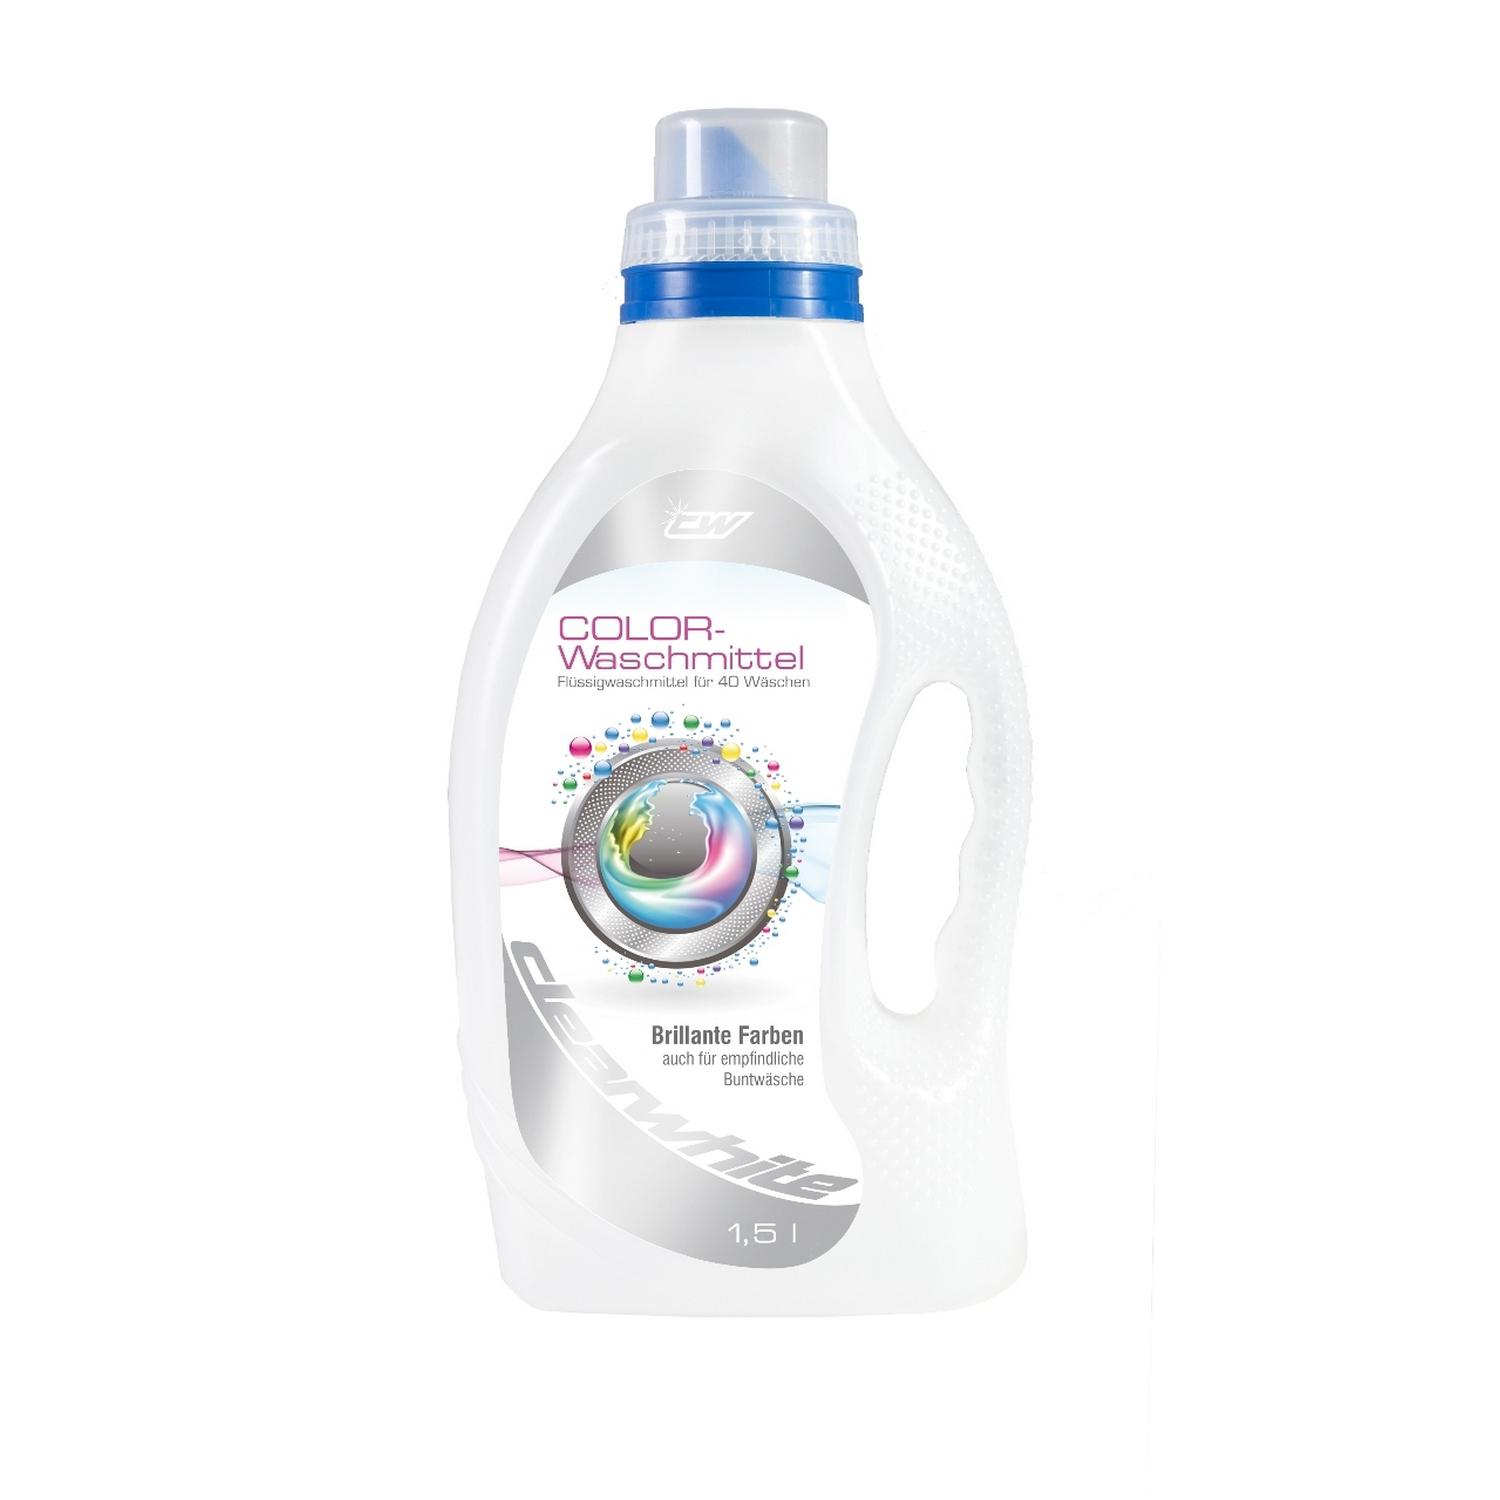 ClearWhite Cw Color-Waschmittel 1,5 liter